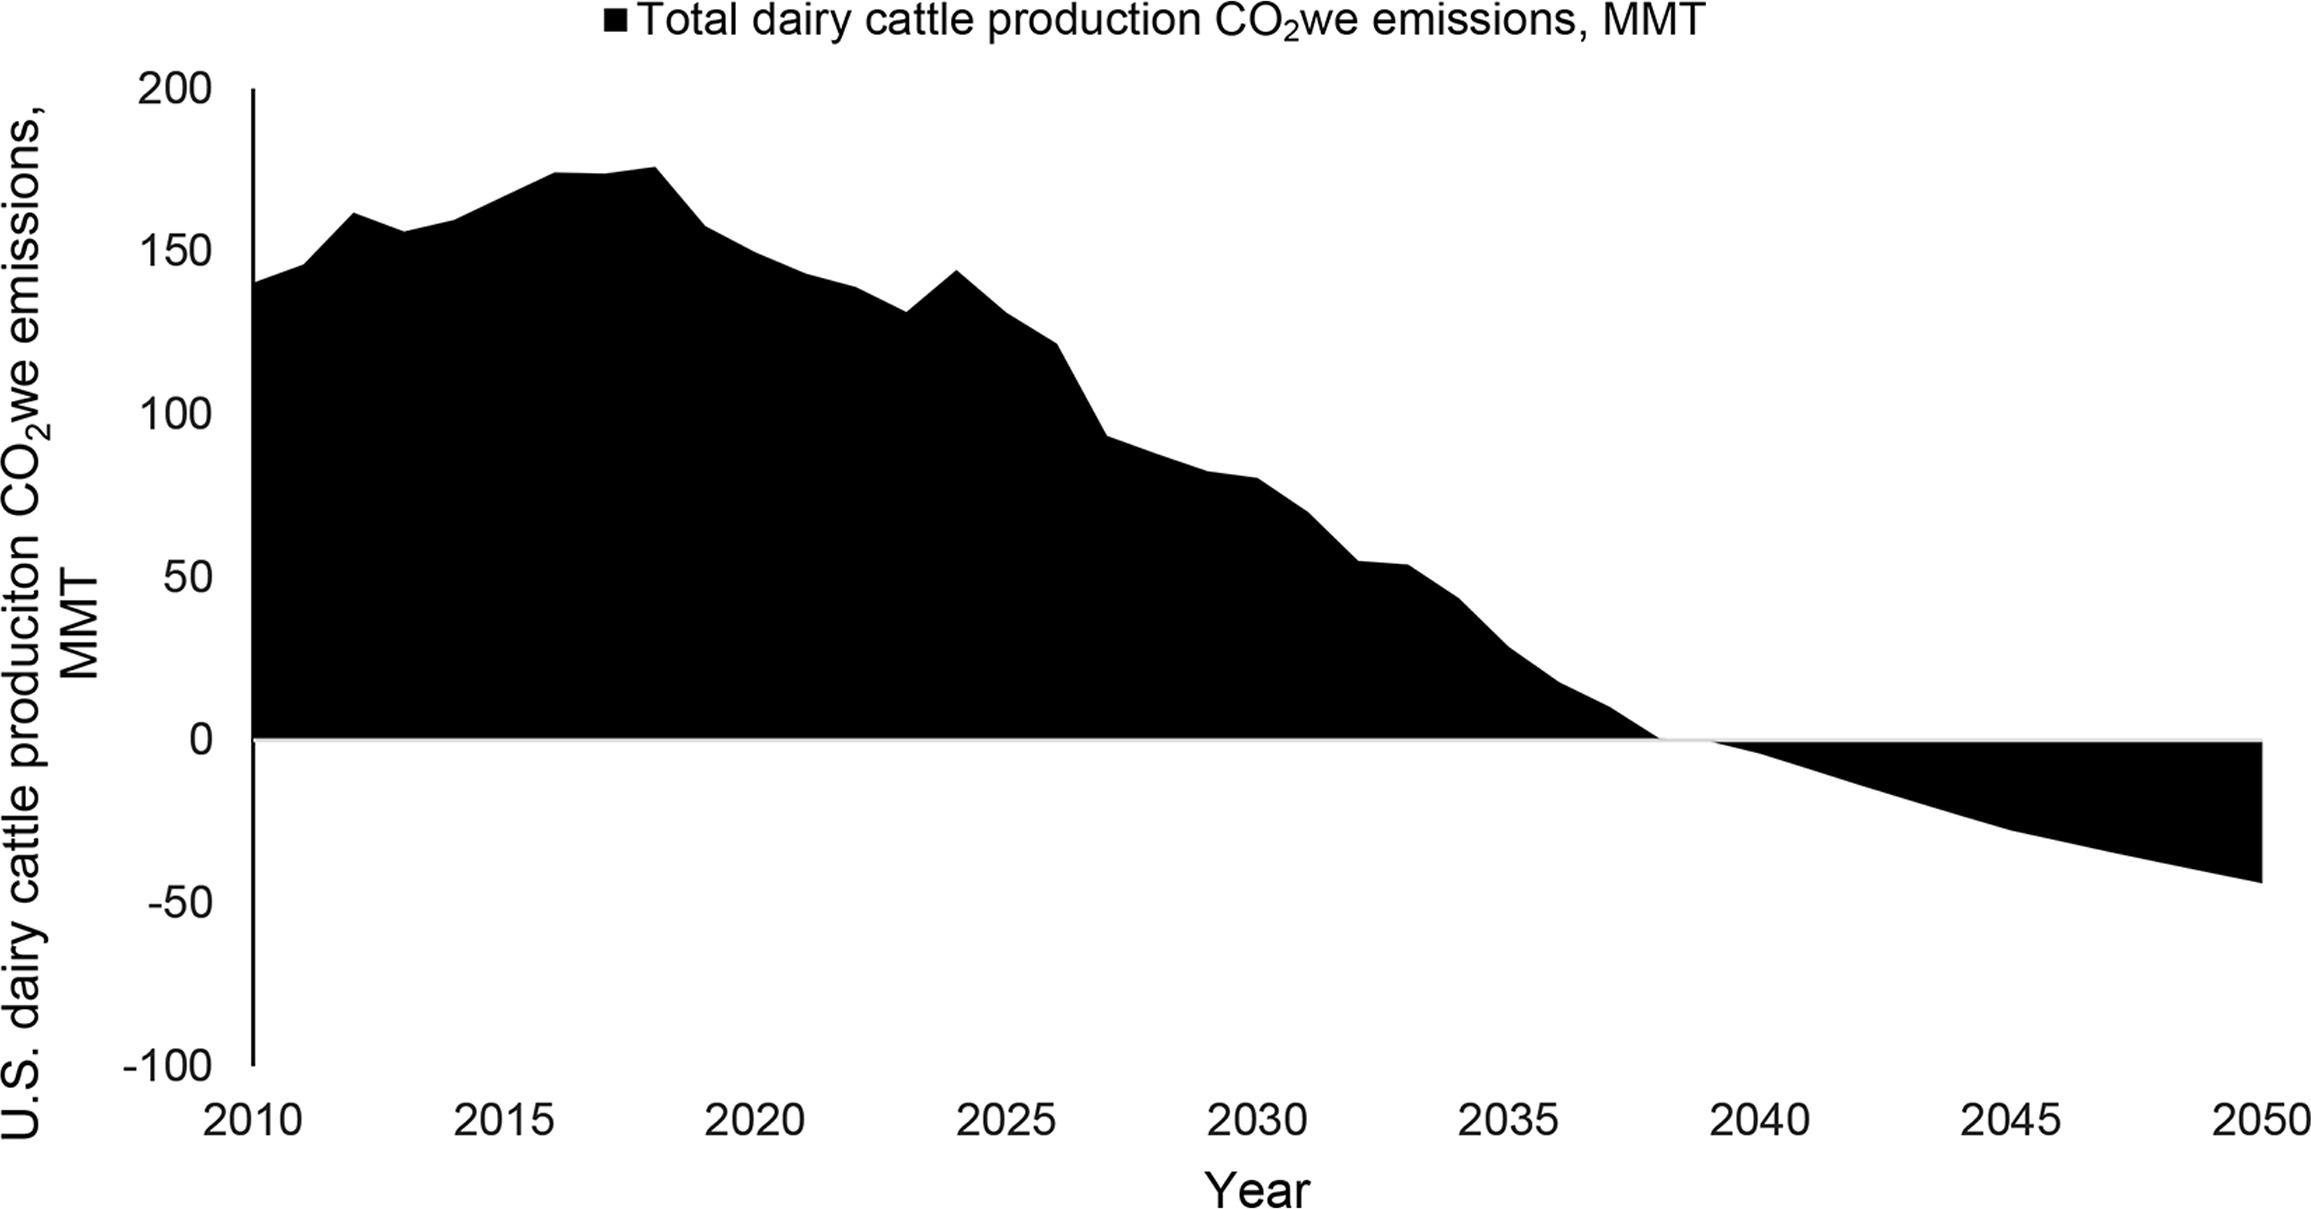 Annual US dairy cattle production cradle-to-farm gate carbon dioxide warming equivalent (CO2we) emissions expressed as million metric tonnes (MMT) from 2010 (reference year) to 2050 for the case study scenarios. This figure demonstrates achieving reductions in emissions as outlined in Figure 5 in 2050 emissions from US dairy cattle production of −89 MMT of CO2we, meaning that no additional warming would occur from dairy production activities in that year.